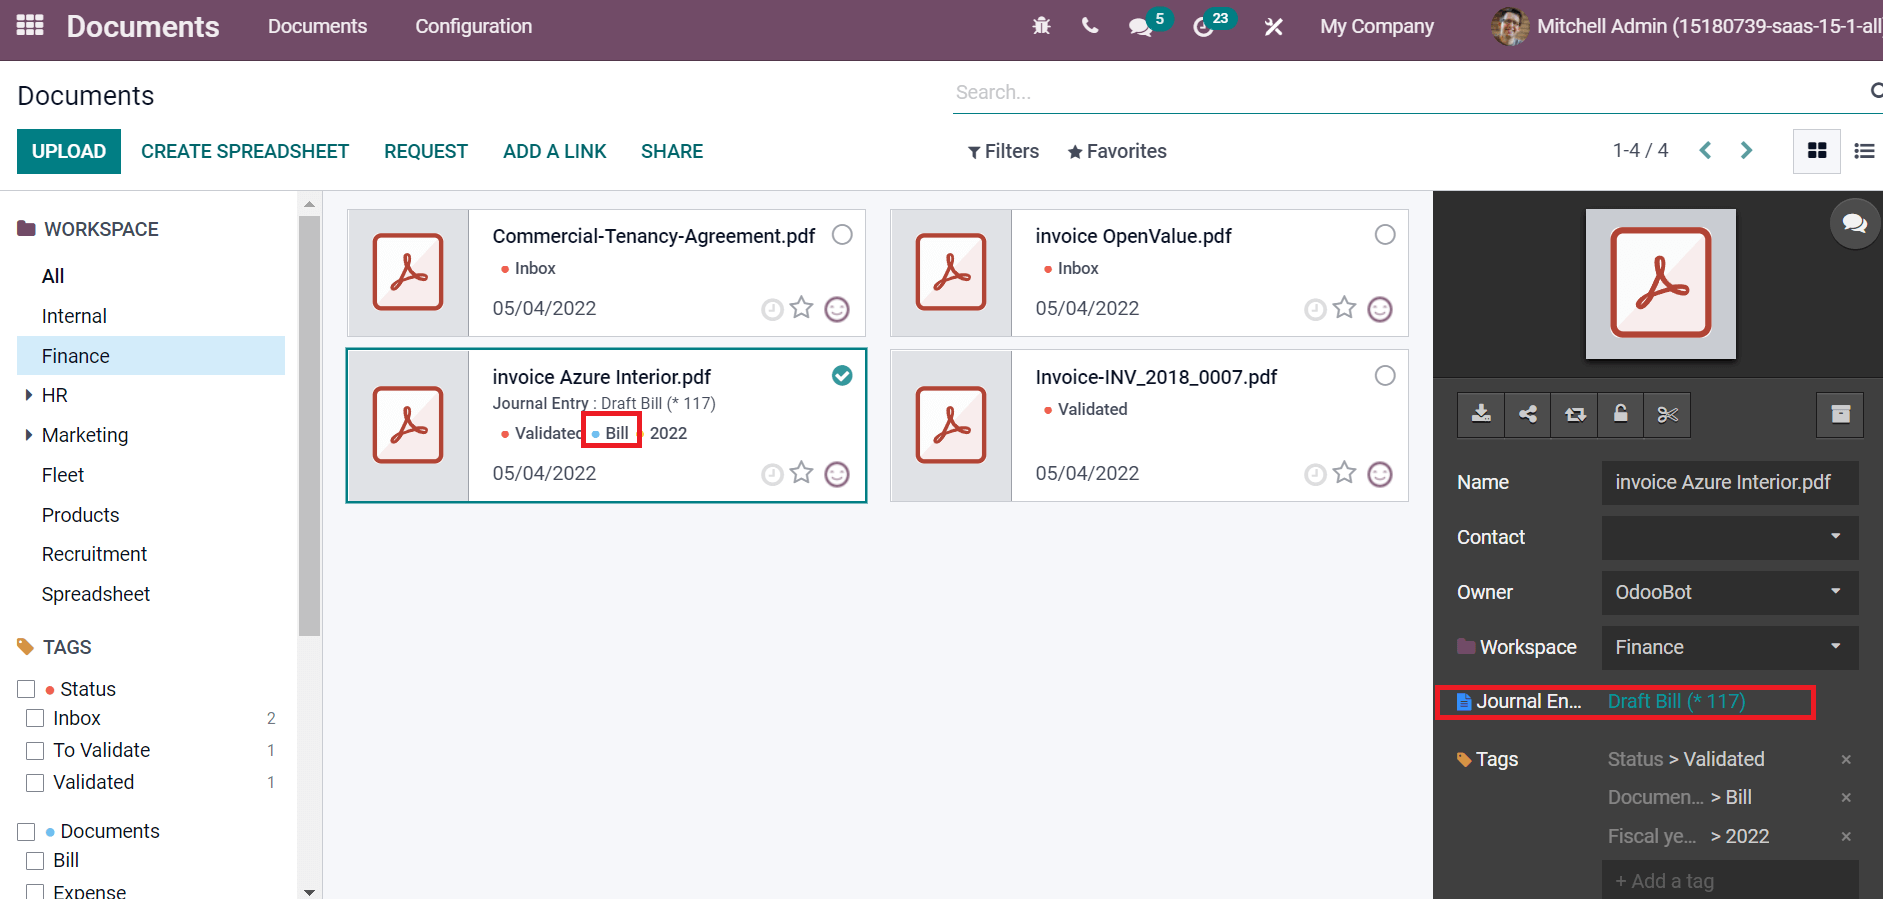 how-to-manage-accounting-documents-with-the-odoo-15-erp-cybrosys